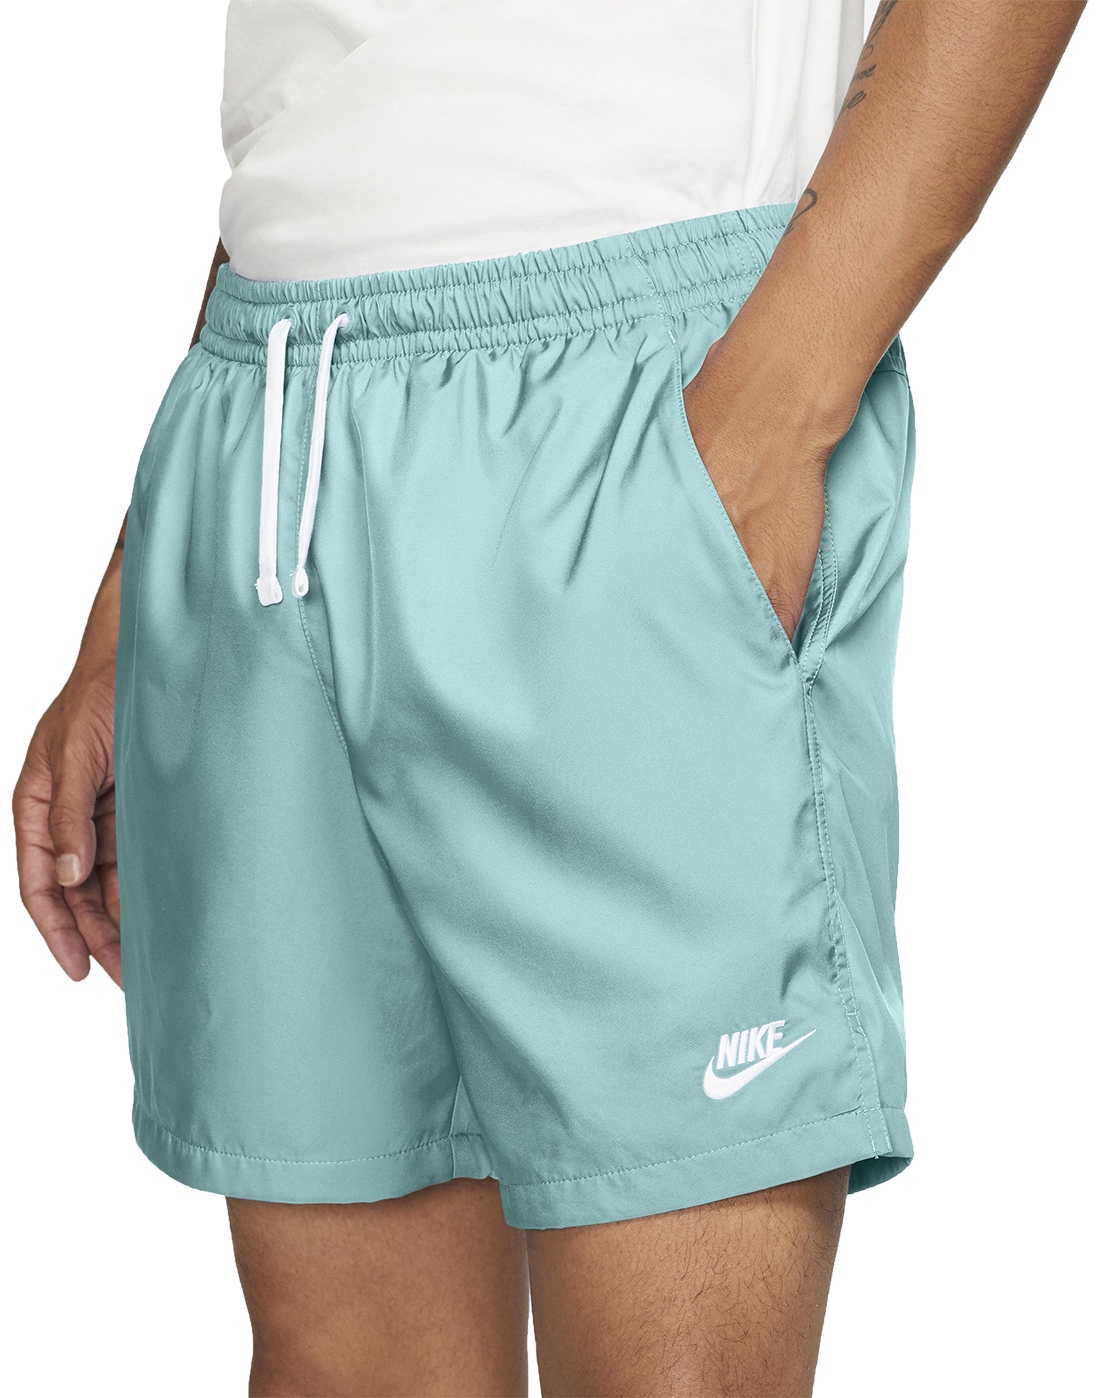 Nike Mens Woven Flow Shorts - Green | Life Style Sports IE